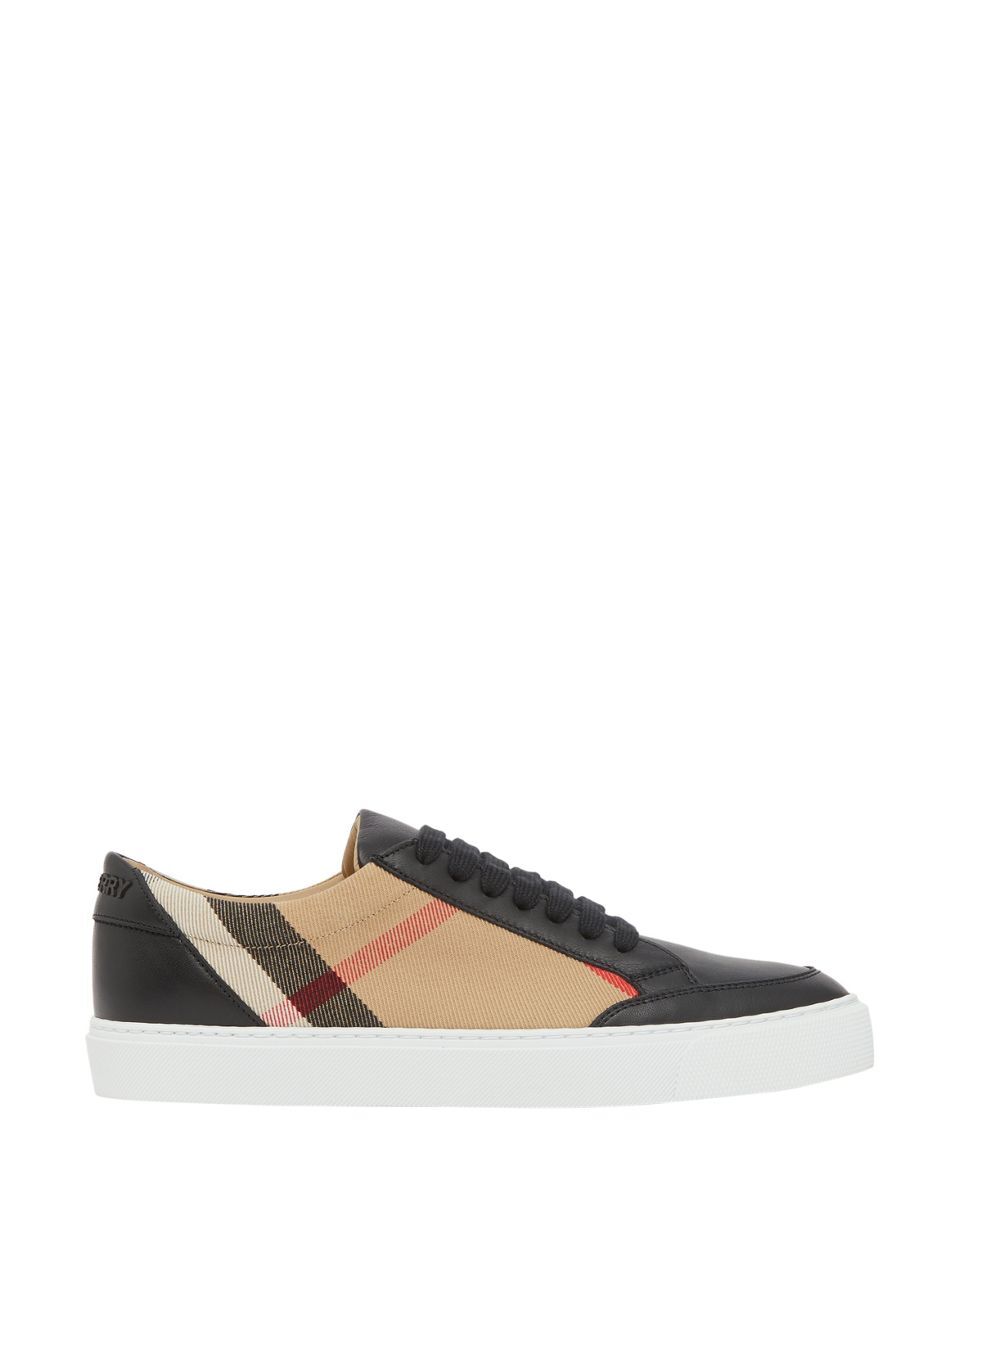 womens burberry trainers